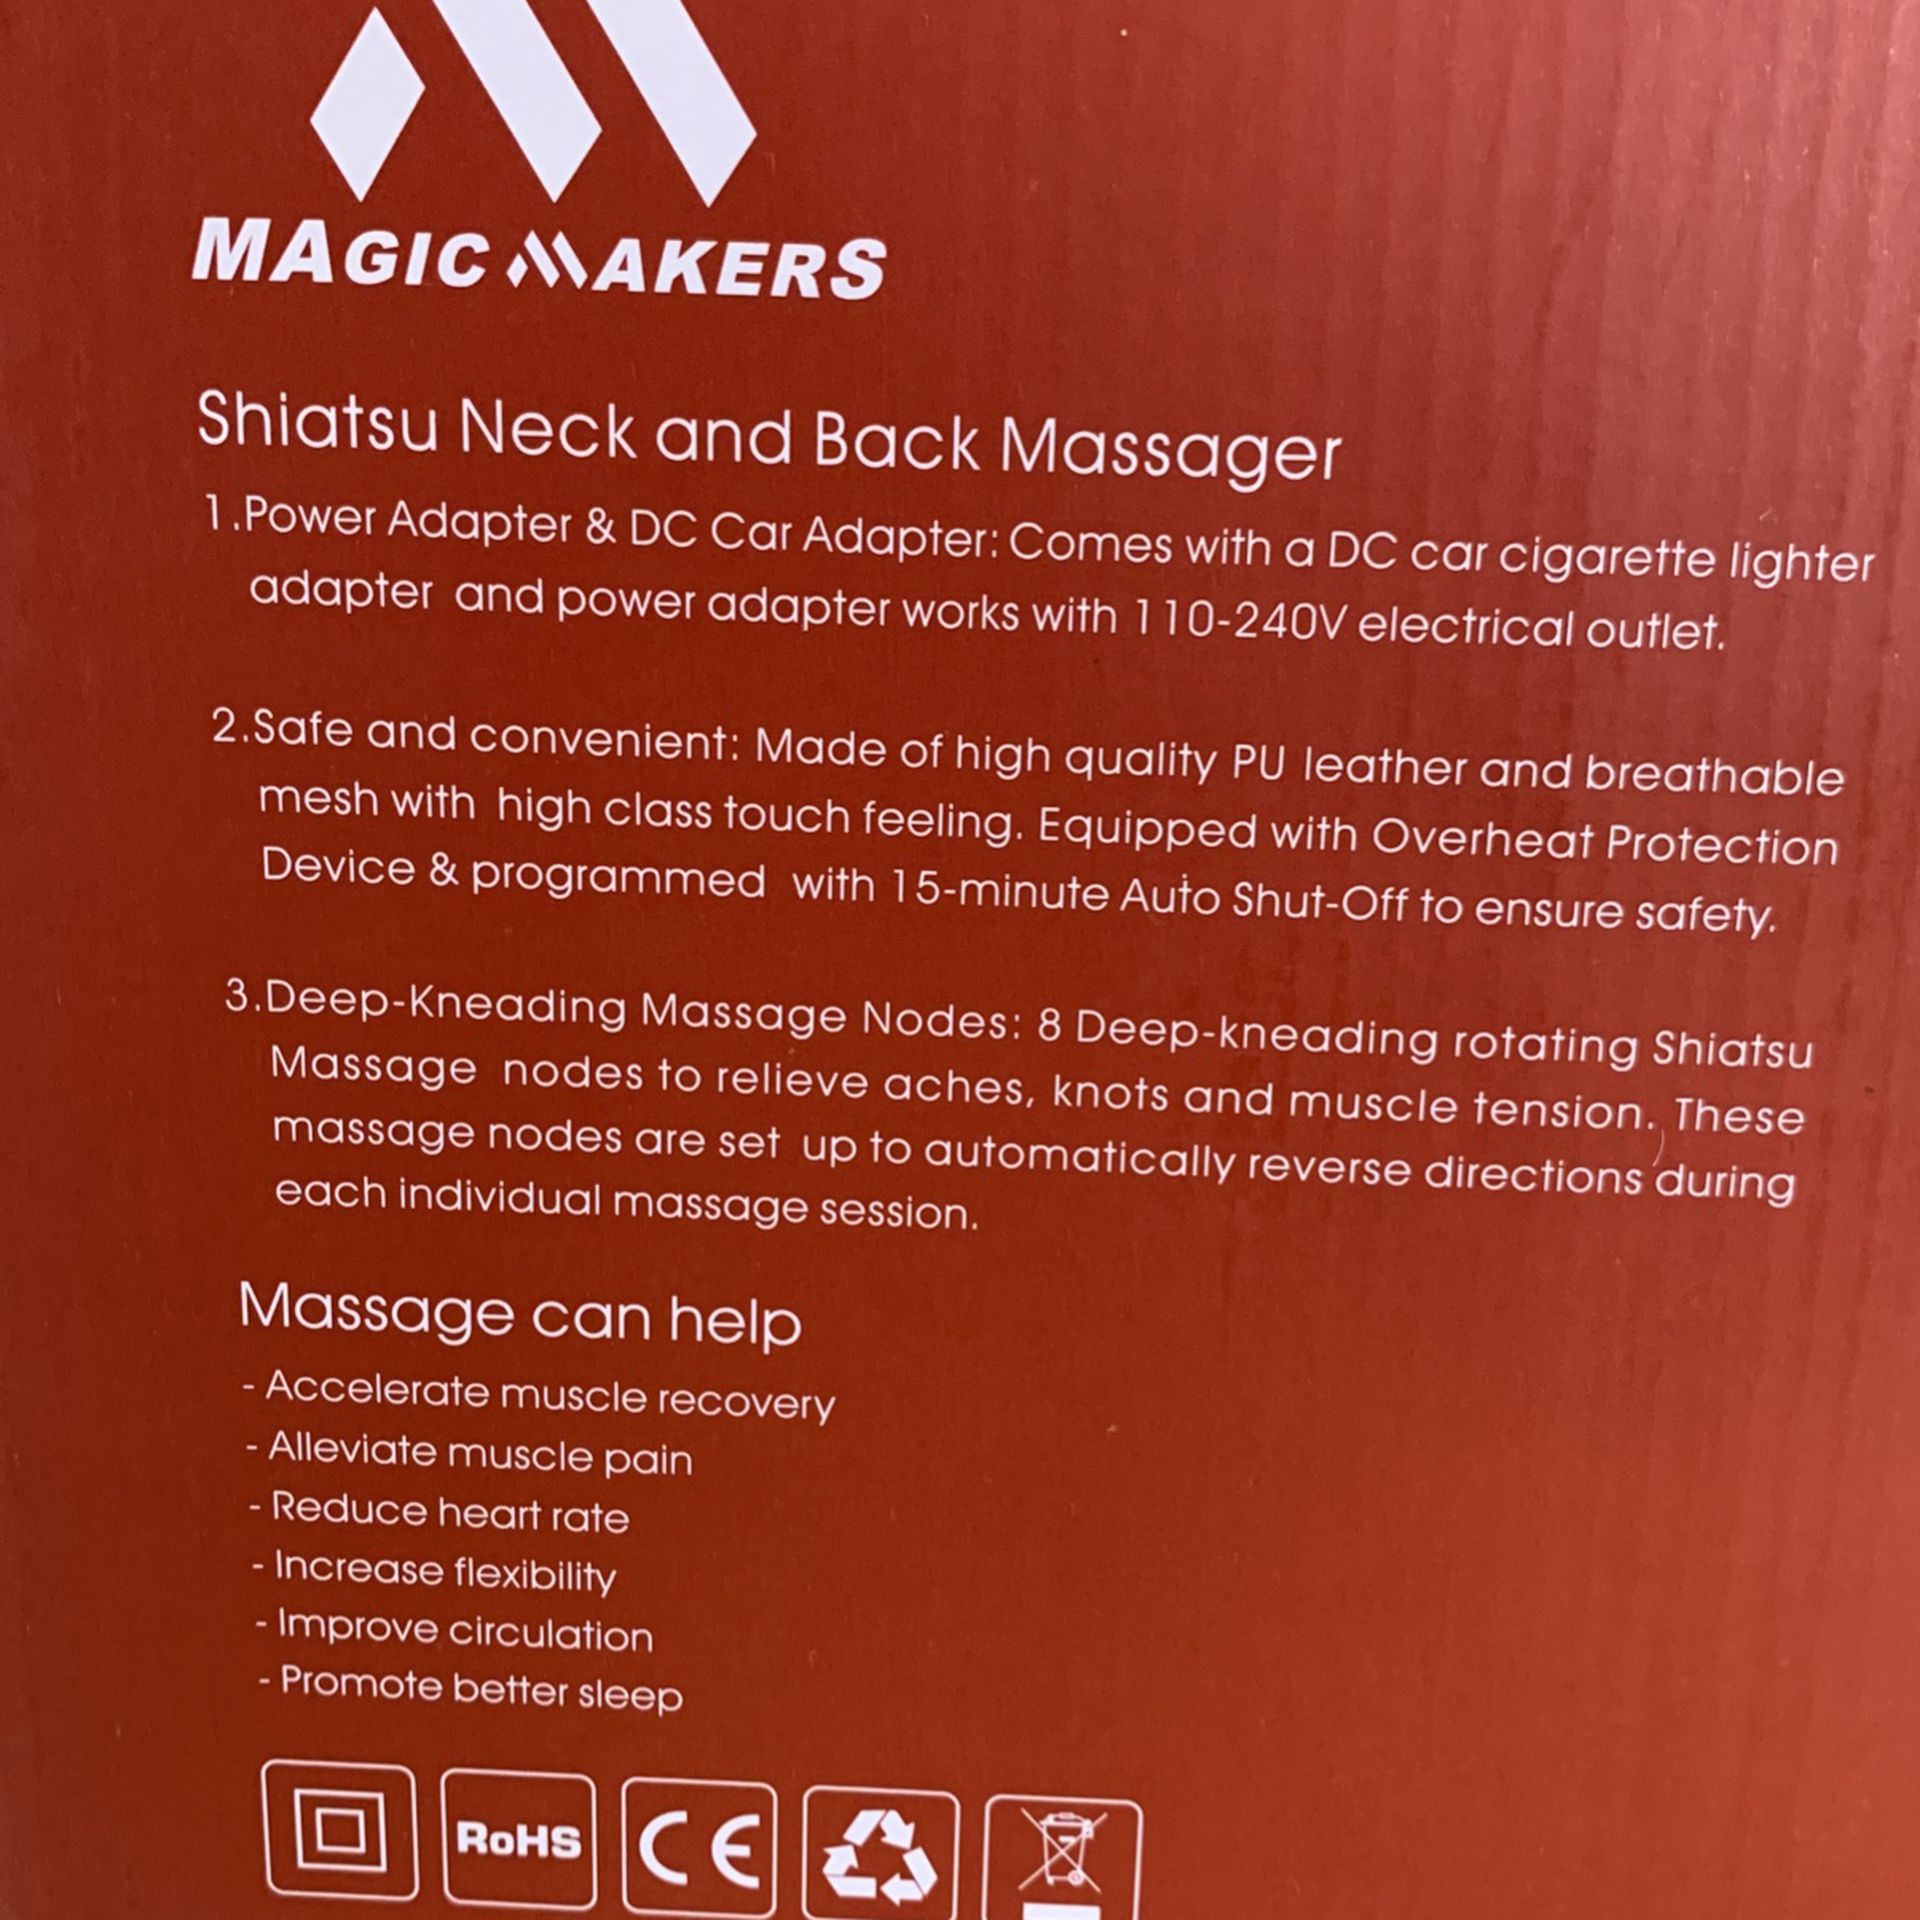 Magic Makers Shiatus Neck and Back Massager - 8 Heated Rollers